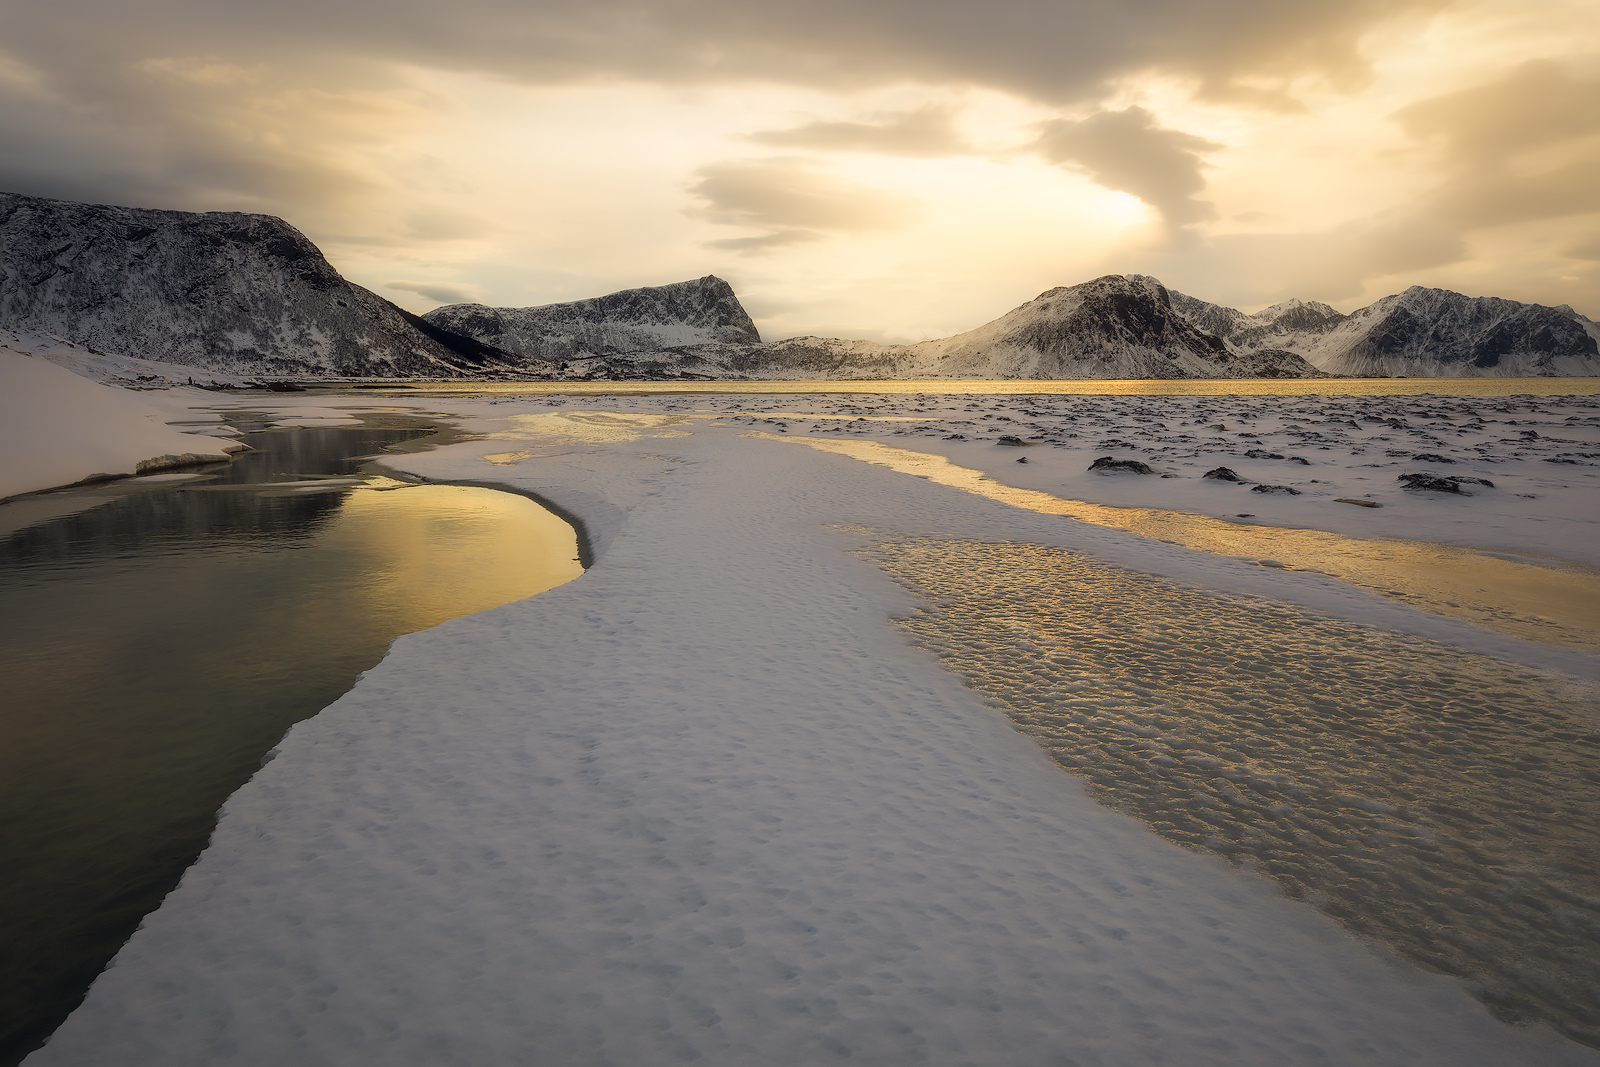 Snow and ice cover a beach in Lofoten, Norway.